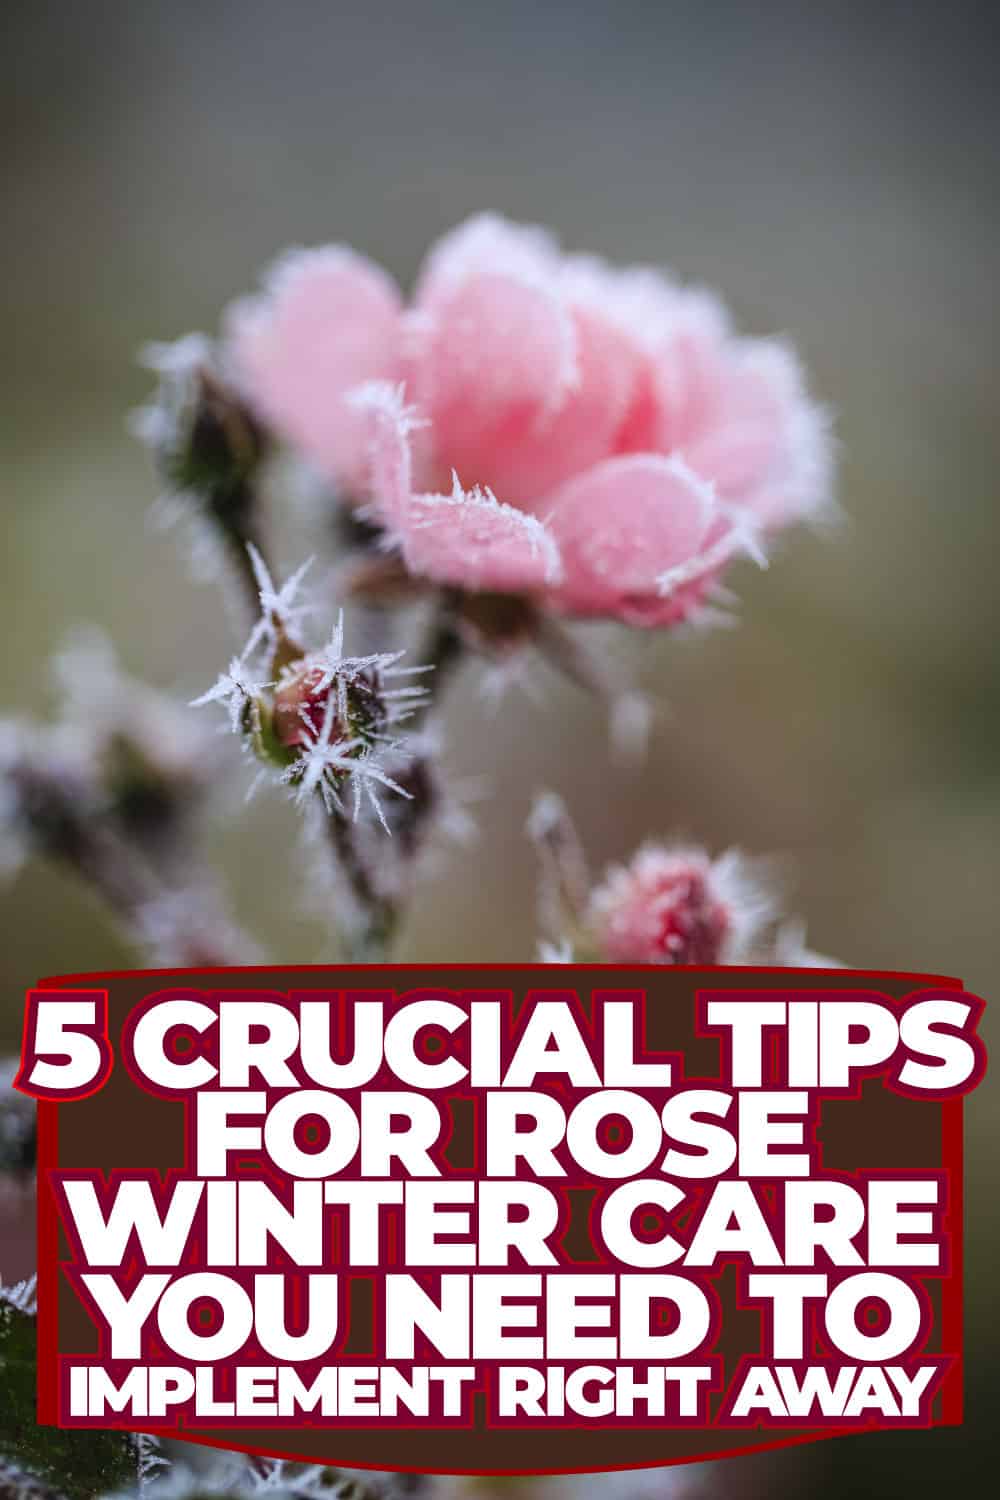 5 Crucial Tips for Rose Winter Care You Need To Implement Right Away